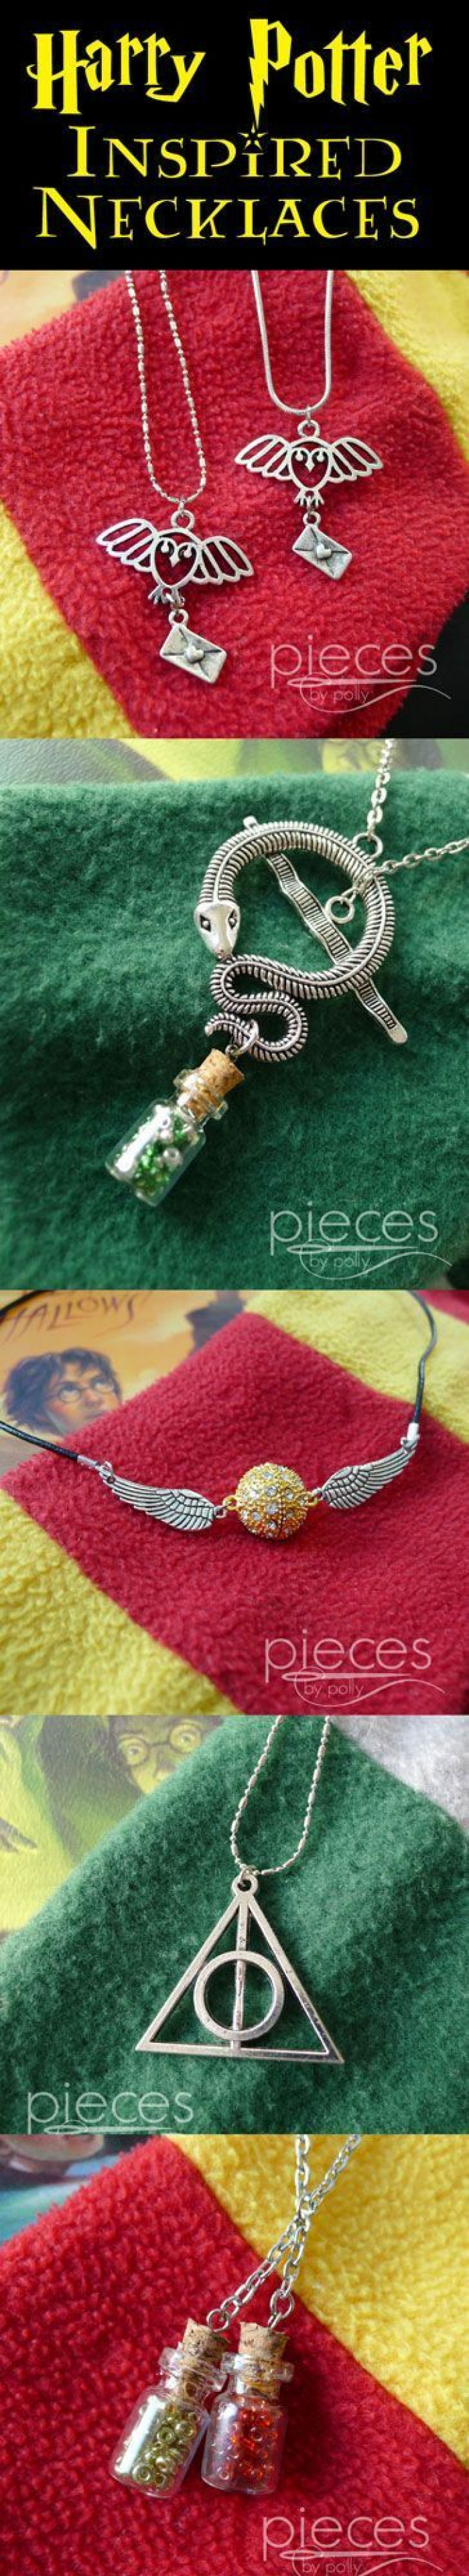 Harry Porter Inspired Necklaces